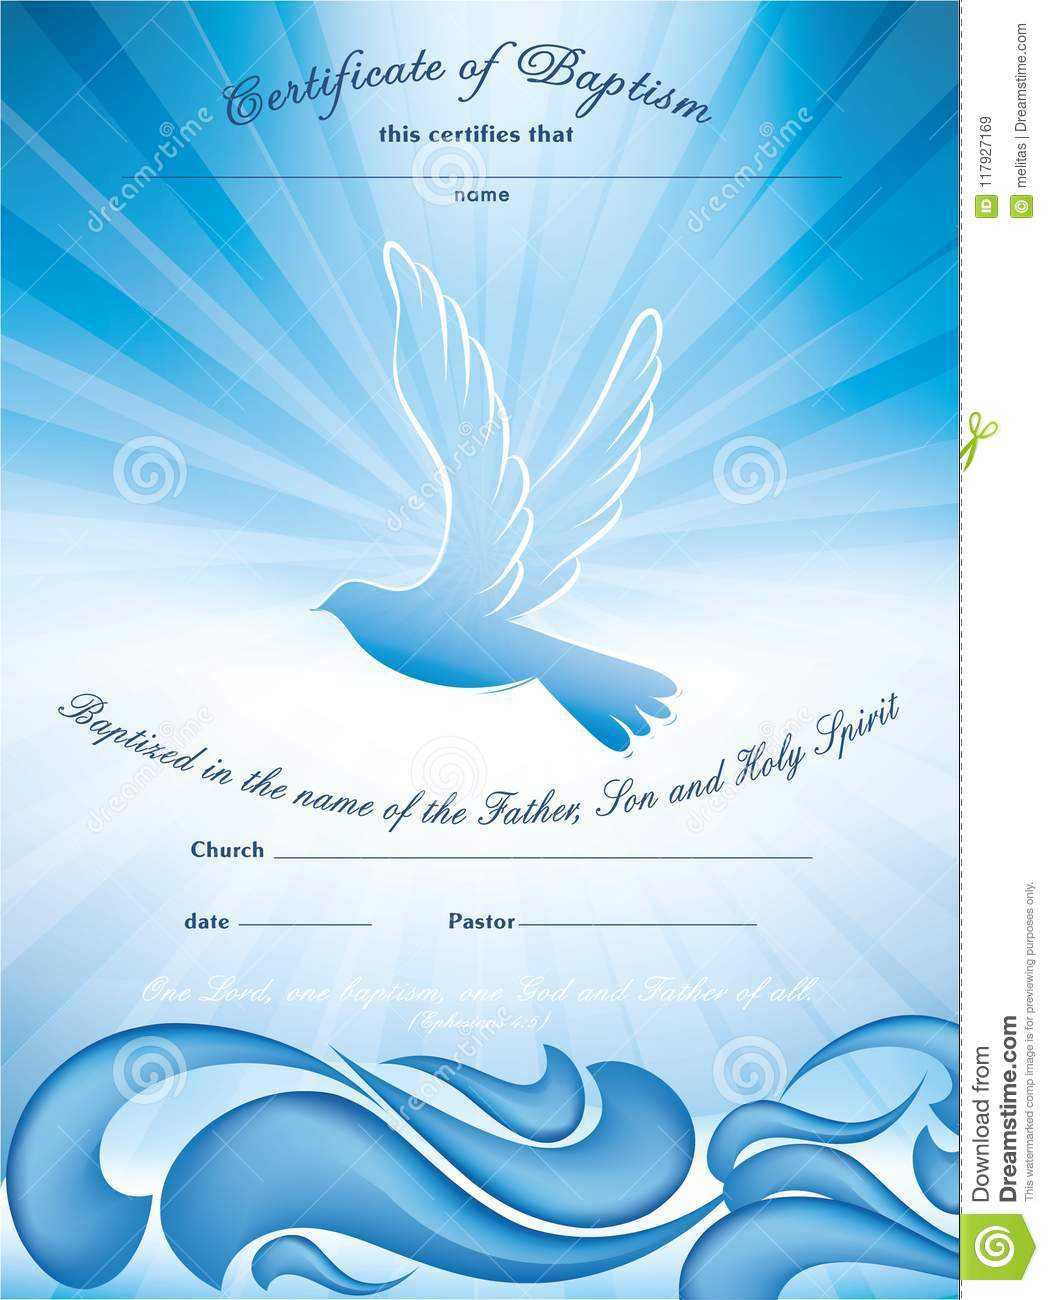 Certificate Baptism Template. With Waves Of Water And Dove In Christian Baptism Certificate Template